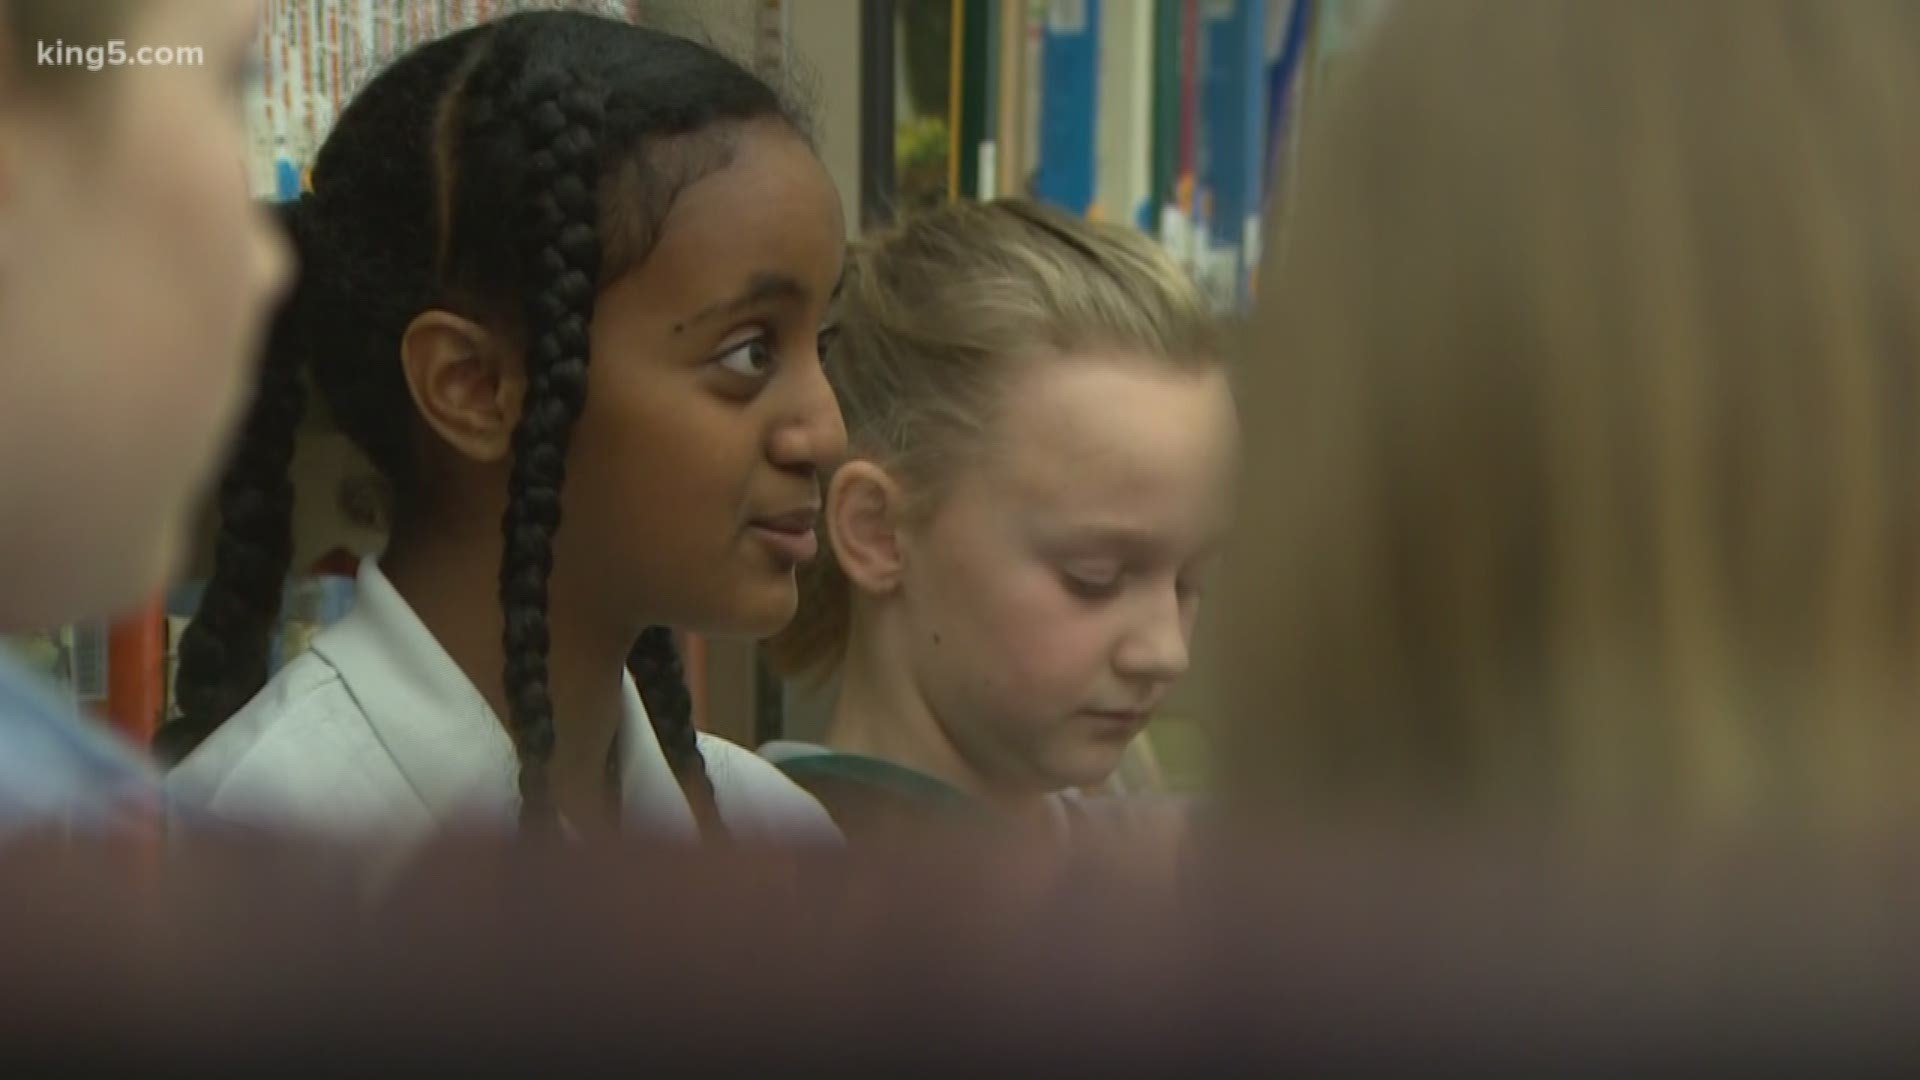 It's a group effort for a great cause. Seven schools in Tacoma are coming together to raise money to build a classroom in Kenya. KING 5's Jenna Hanchard introduces us to some of the students behind the project.